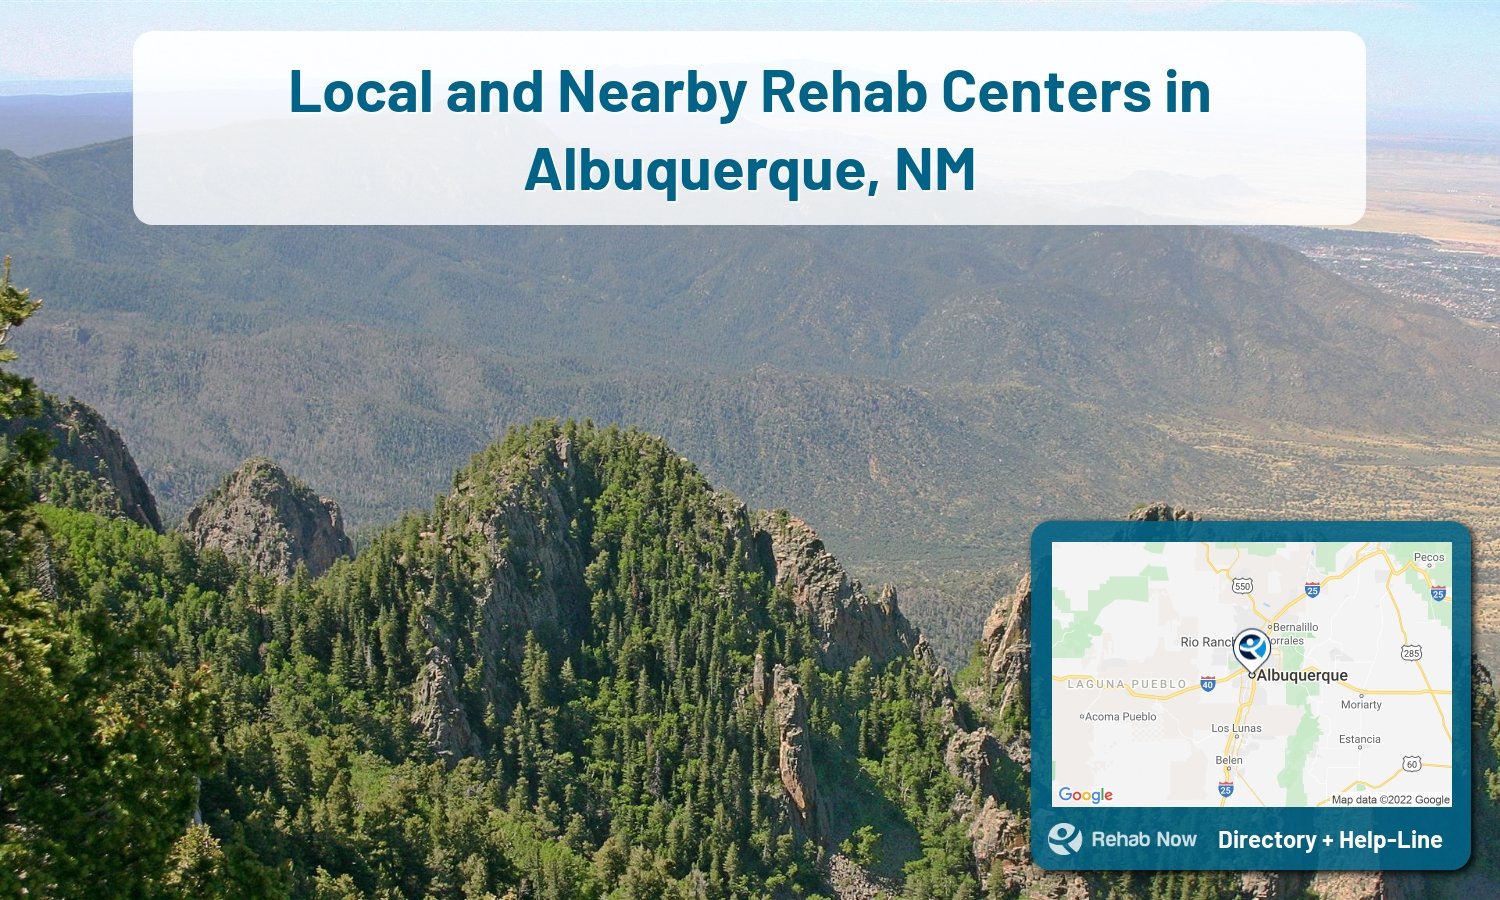 Albuquerque, NM Treatment Centers. Find drug rehab in Albuquerque, New Mexico, or detox and treatment programs. Get the right help now!